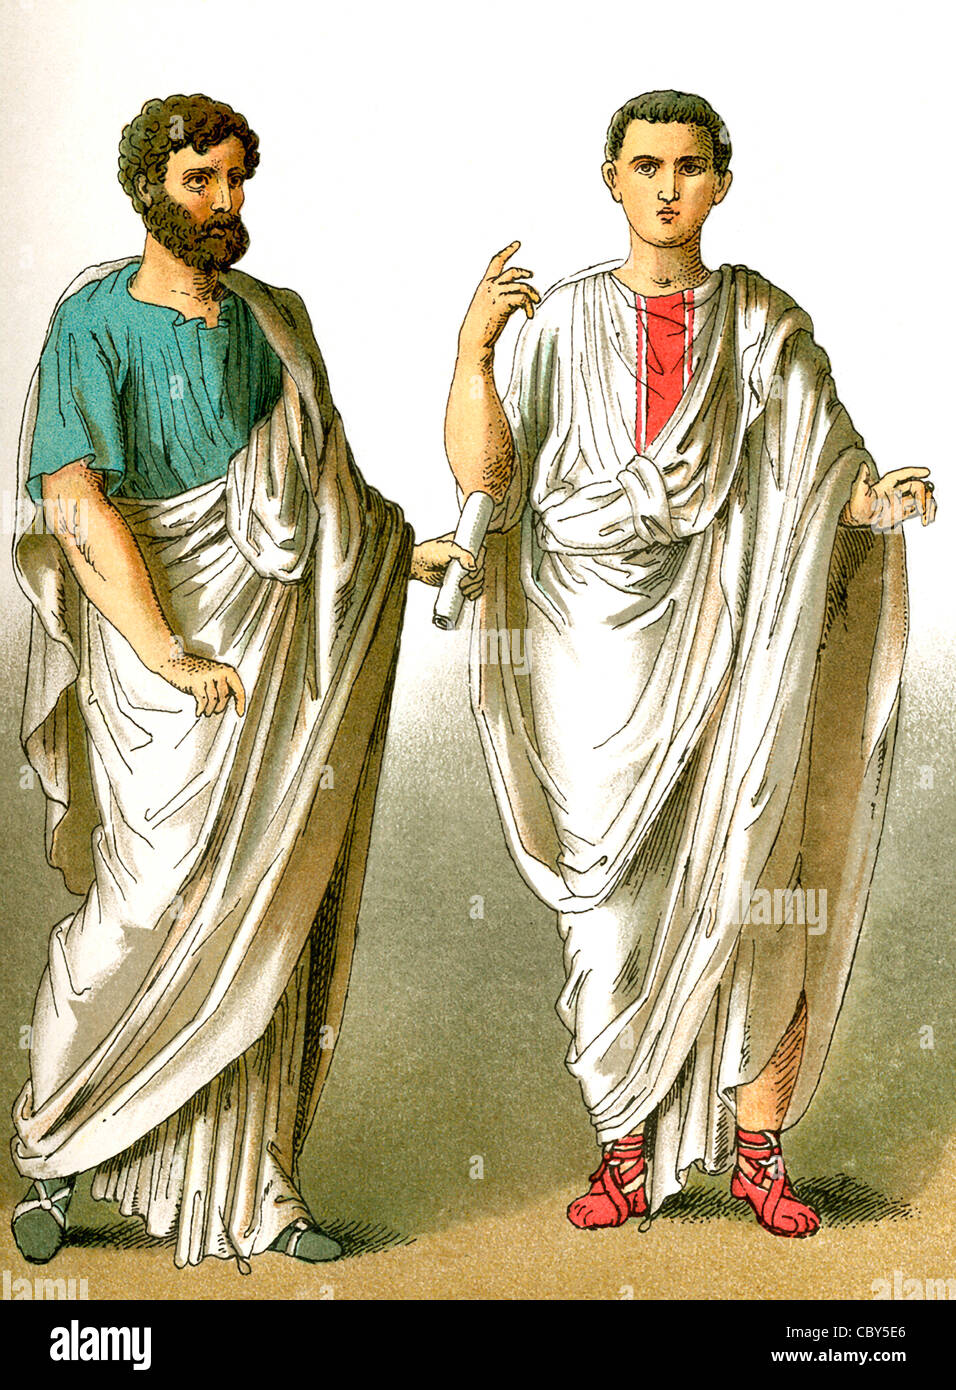 The figures represent ancient Roman males, from left to right: a public orator, a senator. Stock Photo